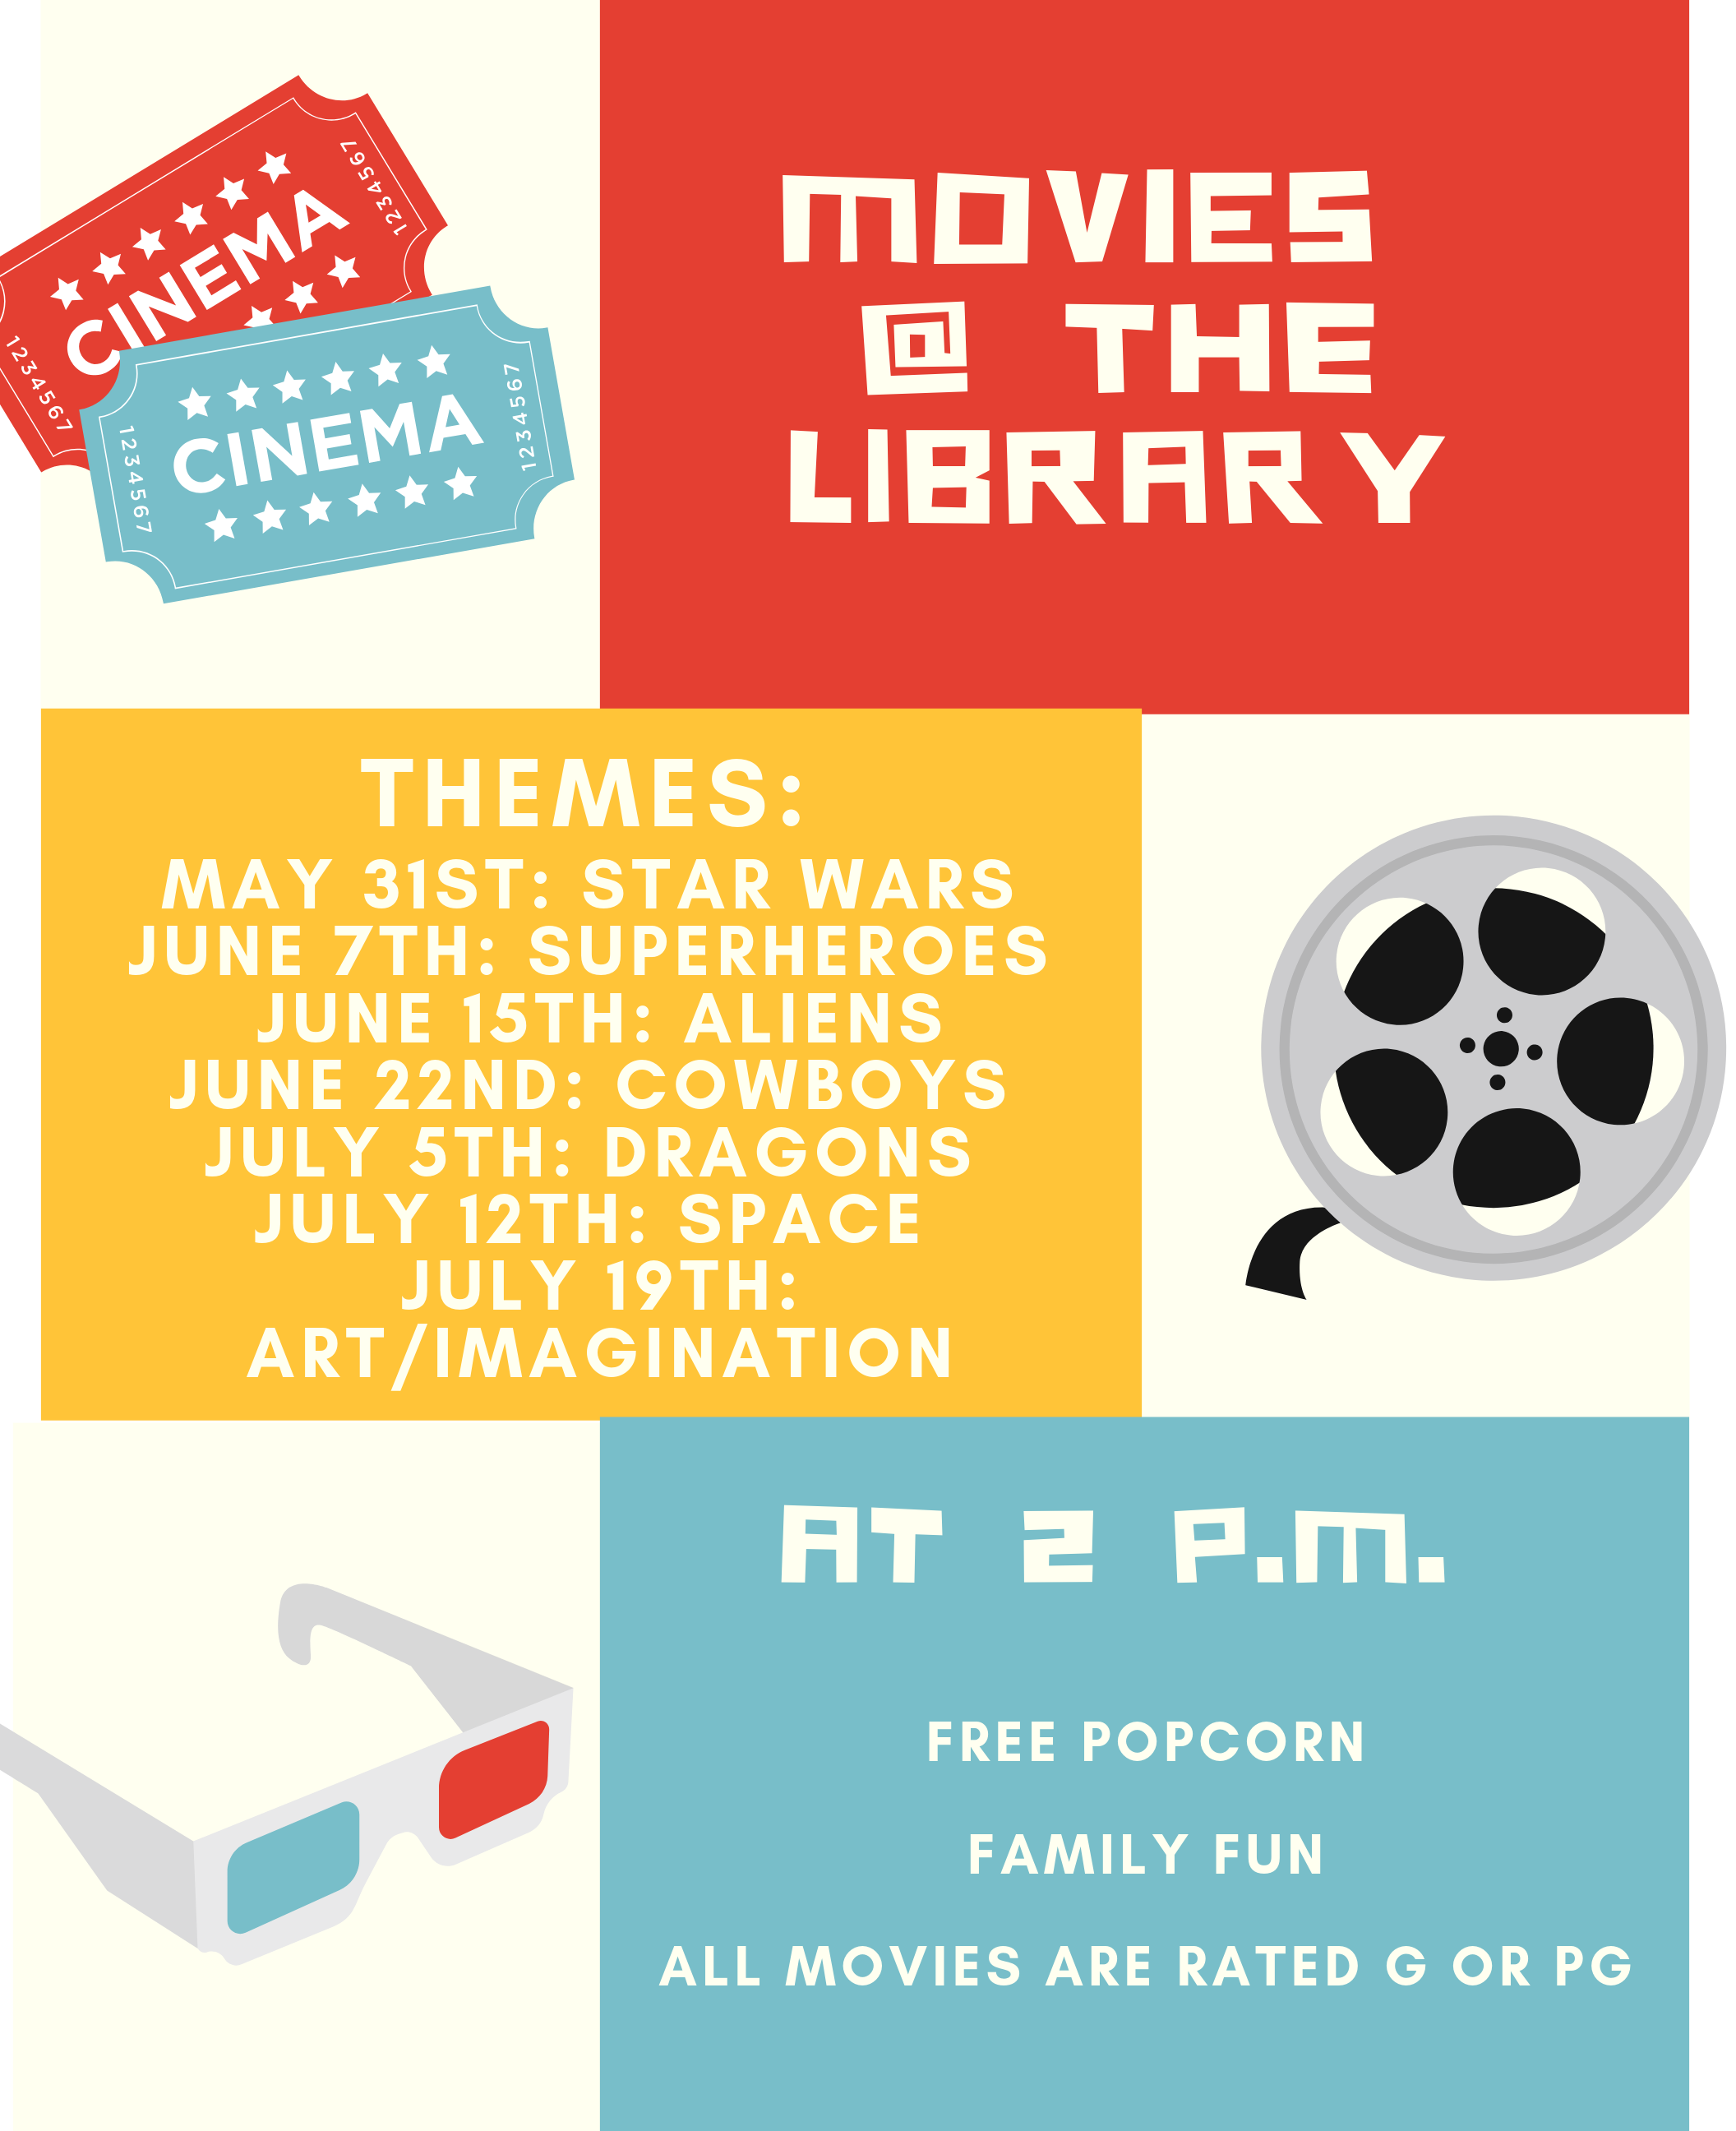 Image contains text boxes; Red text box "Movies @ the Library"; Yellow text box "Themes: May 31st: Star Wars, June 7th: Superheroes, June 15th: Aliens, June 22nd: Cowboys, July 5th: Dragons, July 12th: Space, July 19th: Art/Imagination"; Blue text box "At 2 p.m. free popcorn, family fun, all movies are rated G or PG. Image includes cinema themed clipart. 